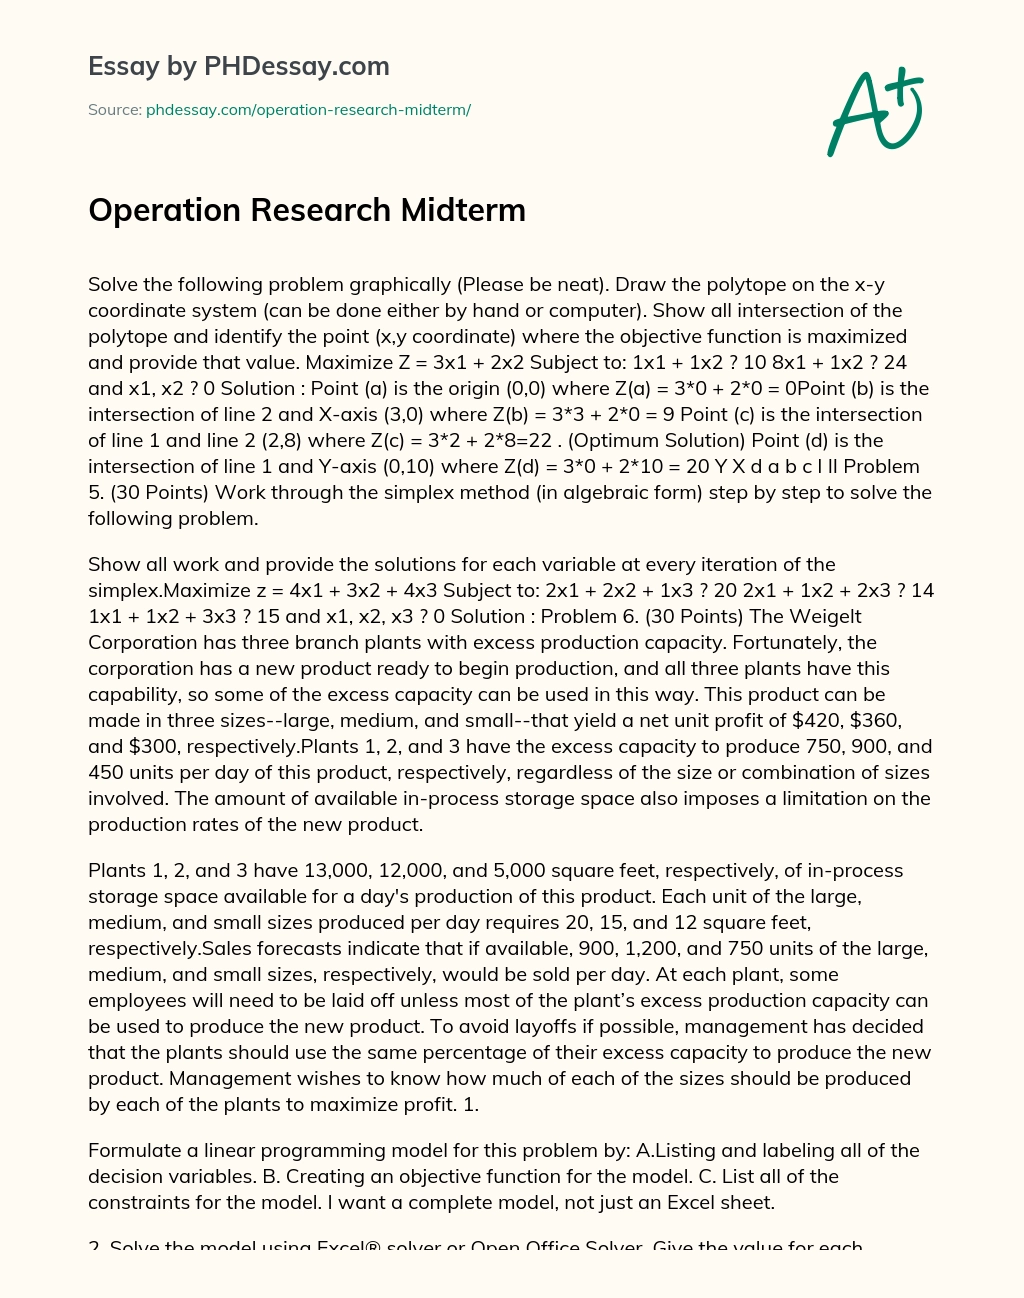 Operation Research Midterm essay